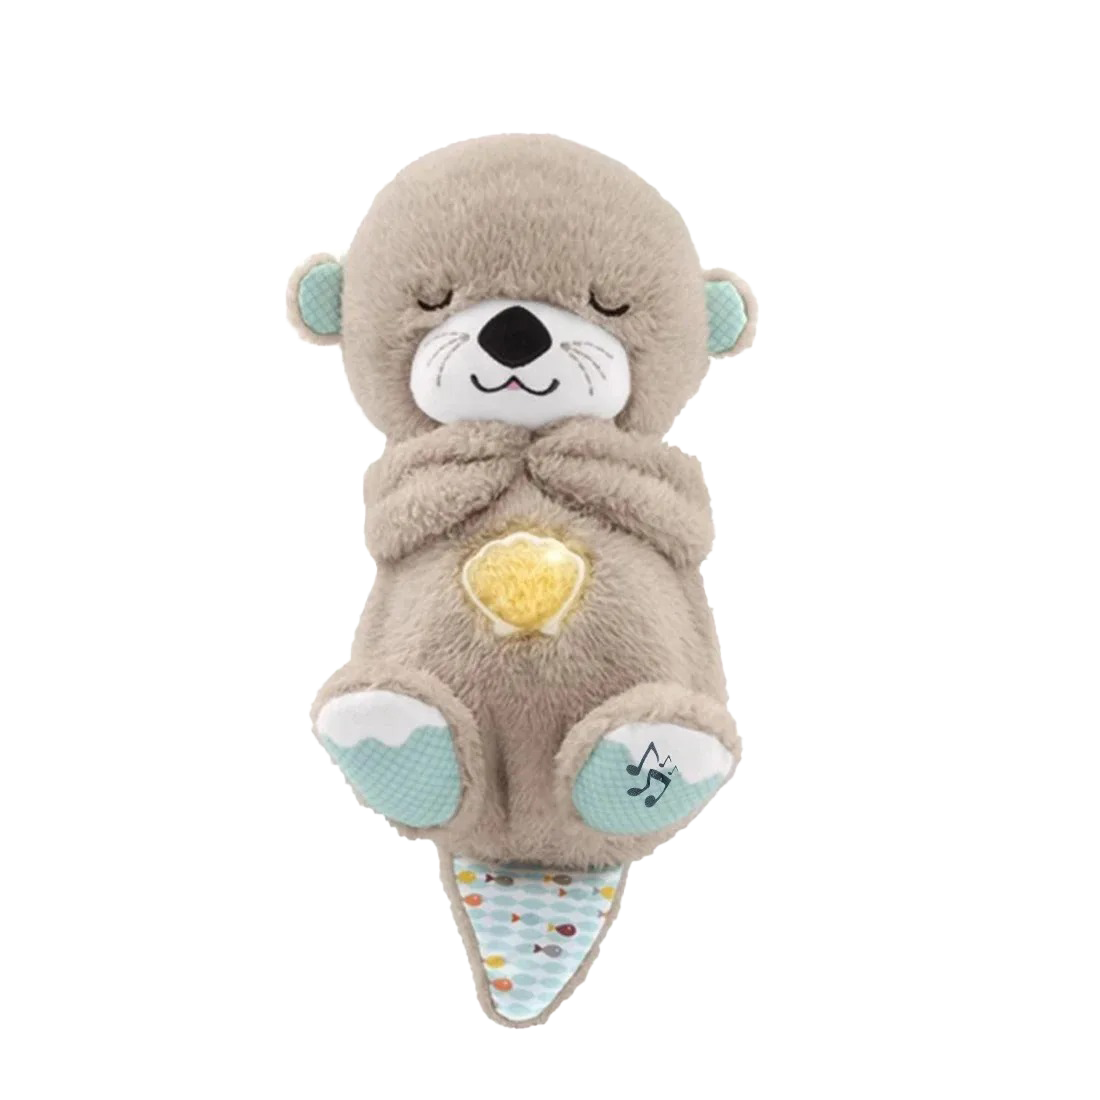 Plush toy of a sleeping otter holding a yellow star, with a patterned ice cream cone body, designed as a peaceful nights Soulful Trading Sleep Buddy.